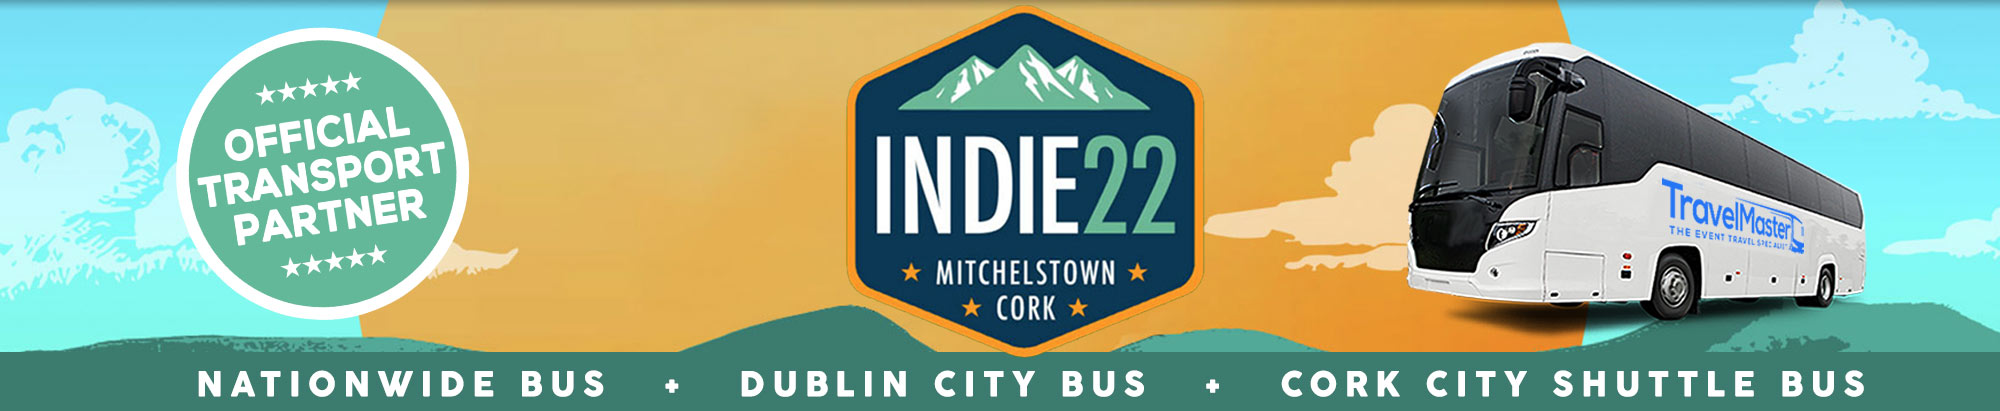 Bus to Indie 22 - Return Service to Indiependence Festival